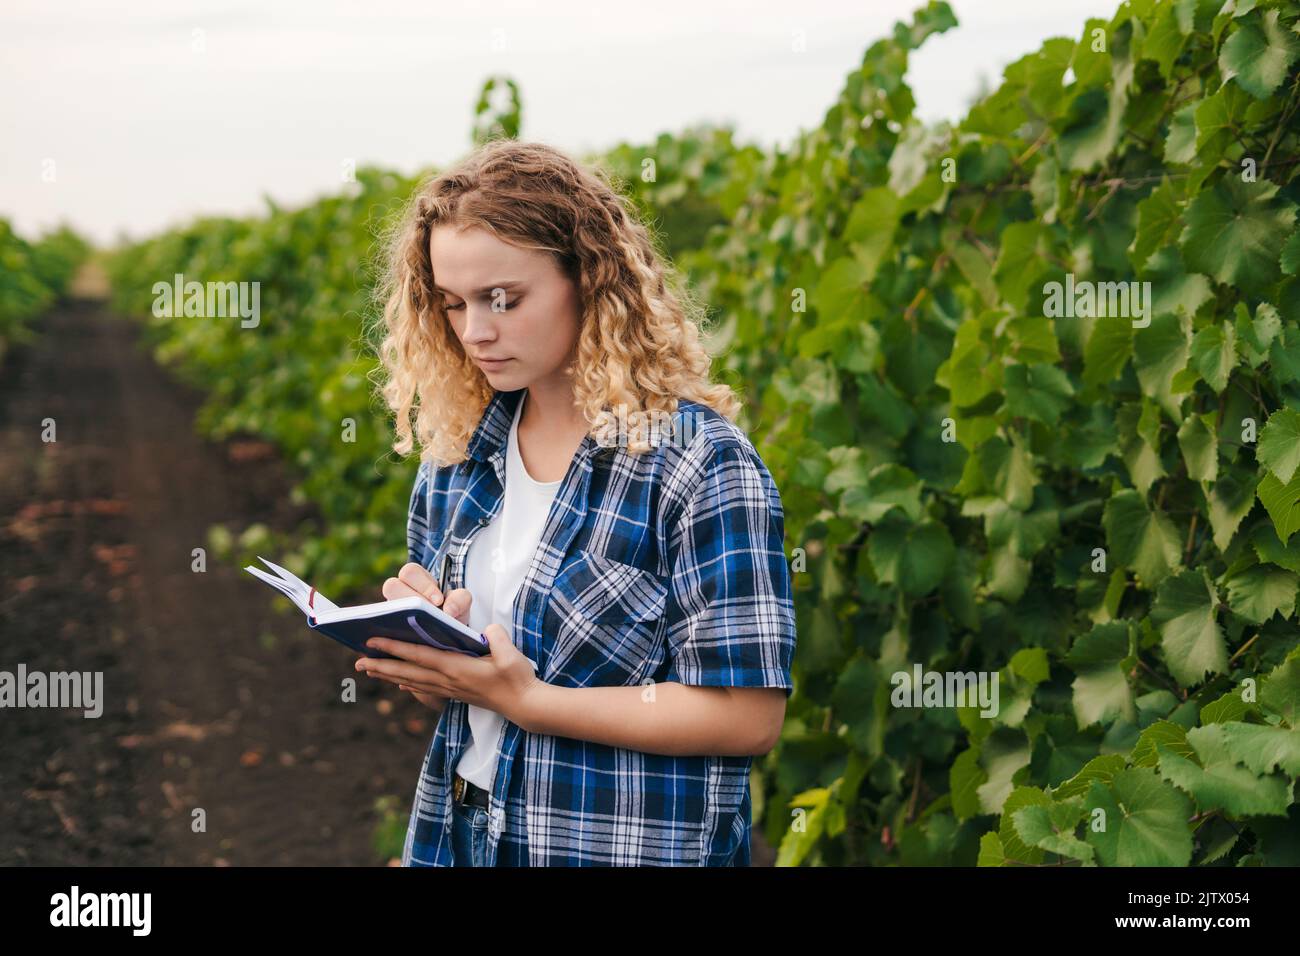 Agricultural curly-haired woman recording growth and disease of vineyards in her notepad. Smart farmer and farming concept. Agriculture technology Stock Photo